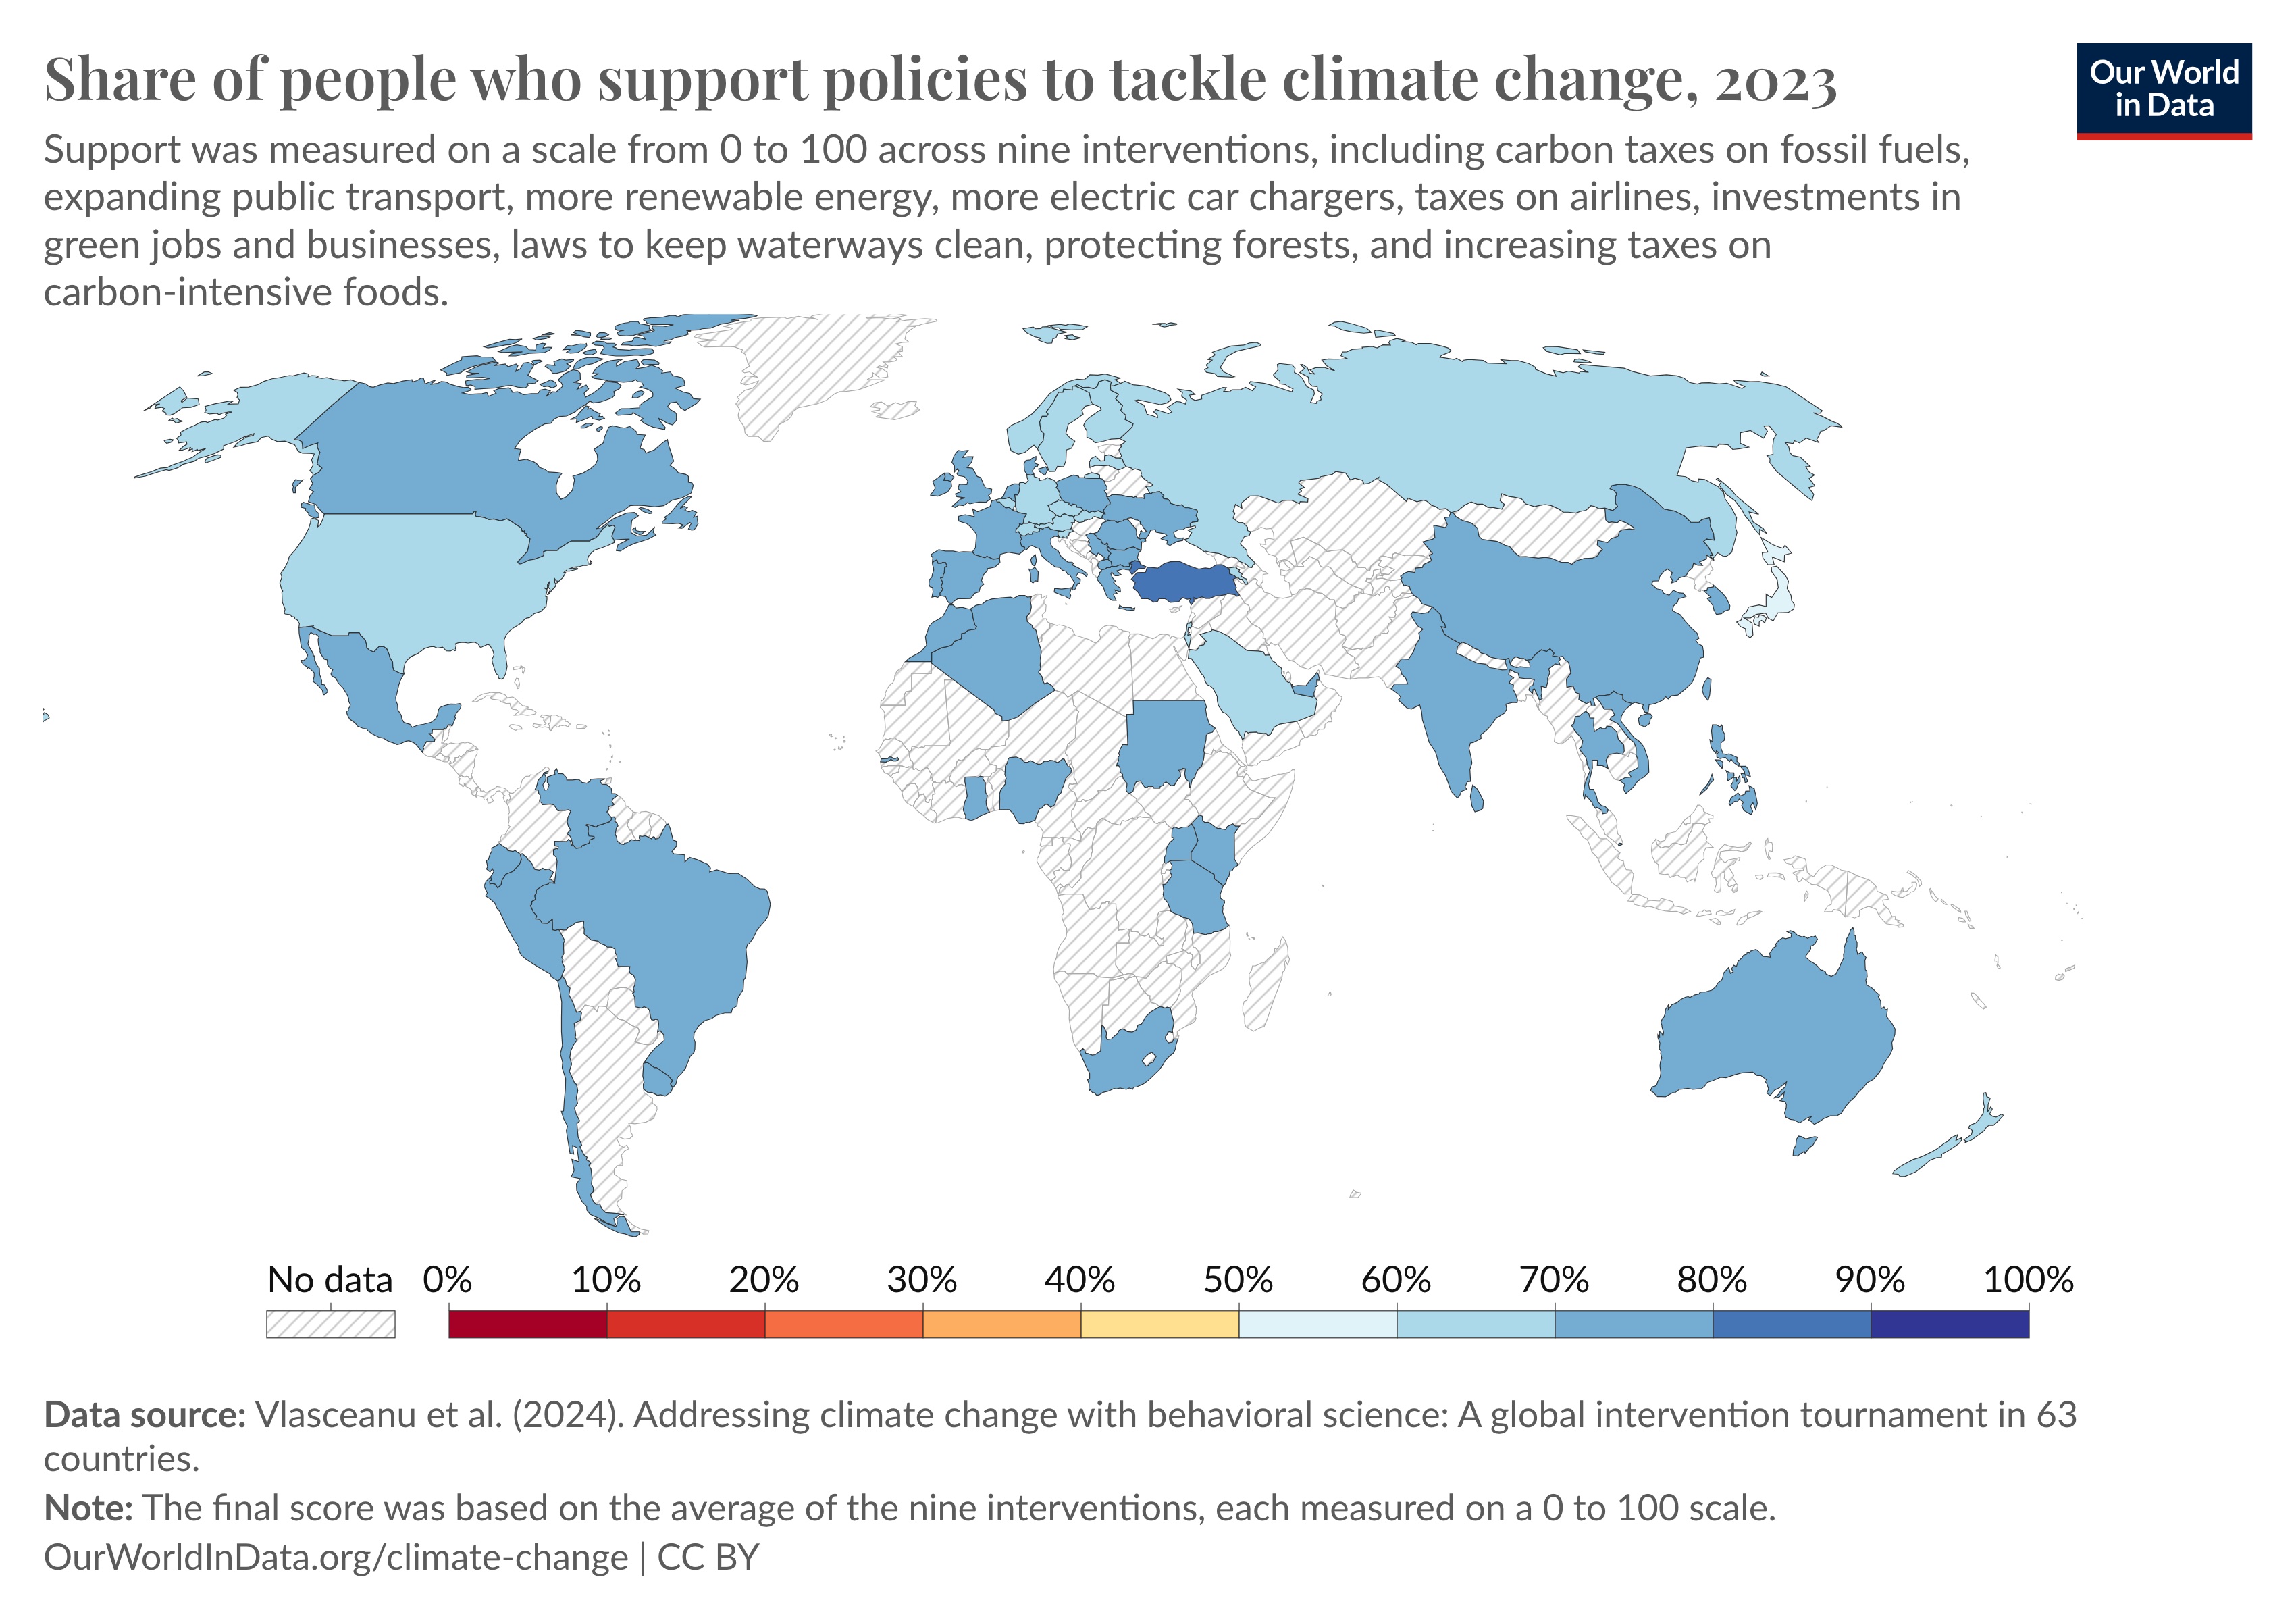 World map showing public support for climate change policies by country in 2023, measured on a scale from 0 to 100, with varying shades of blue indicating levels of support.